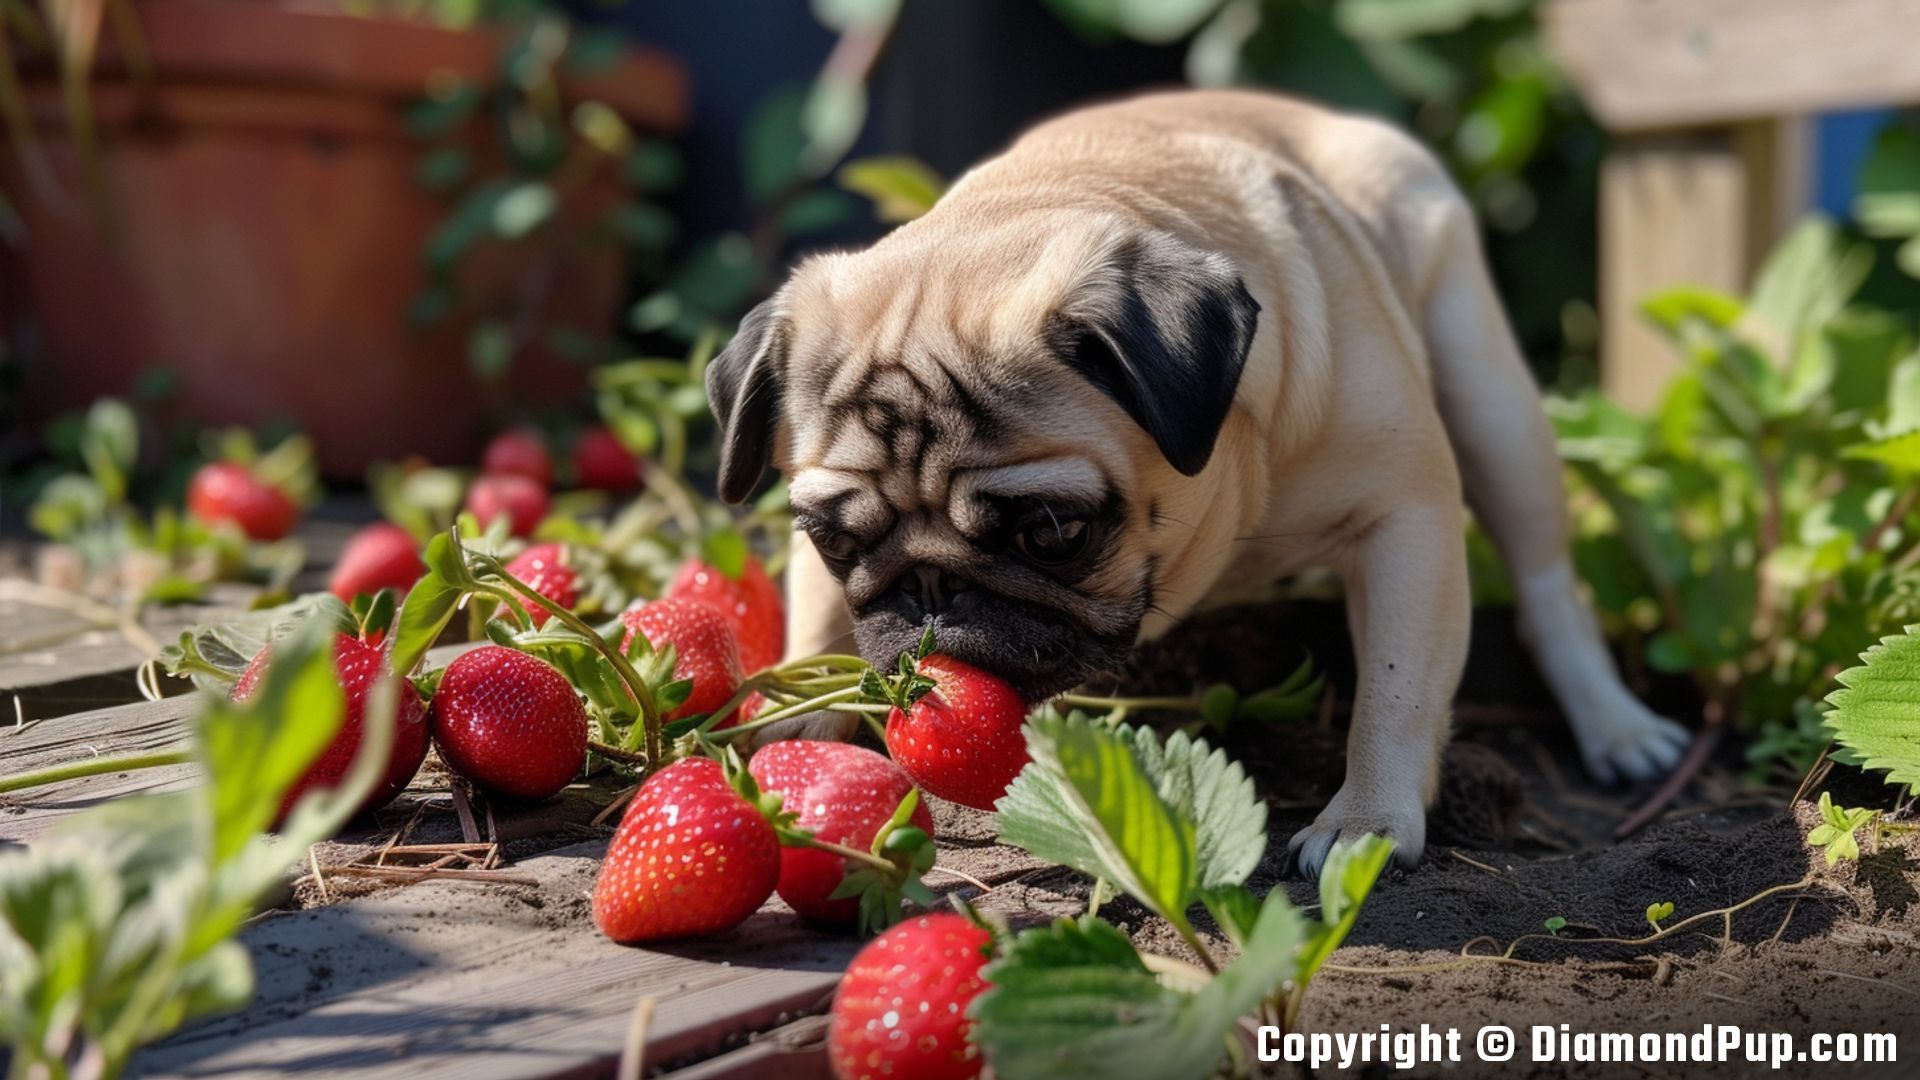 Photo of an Adorable Pug Snacking on Strawberries